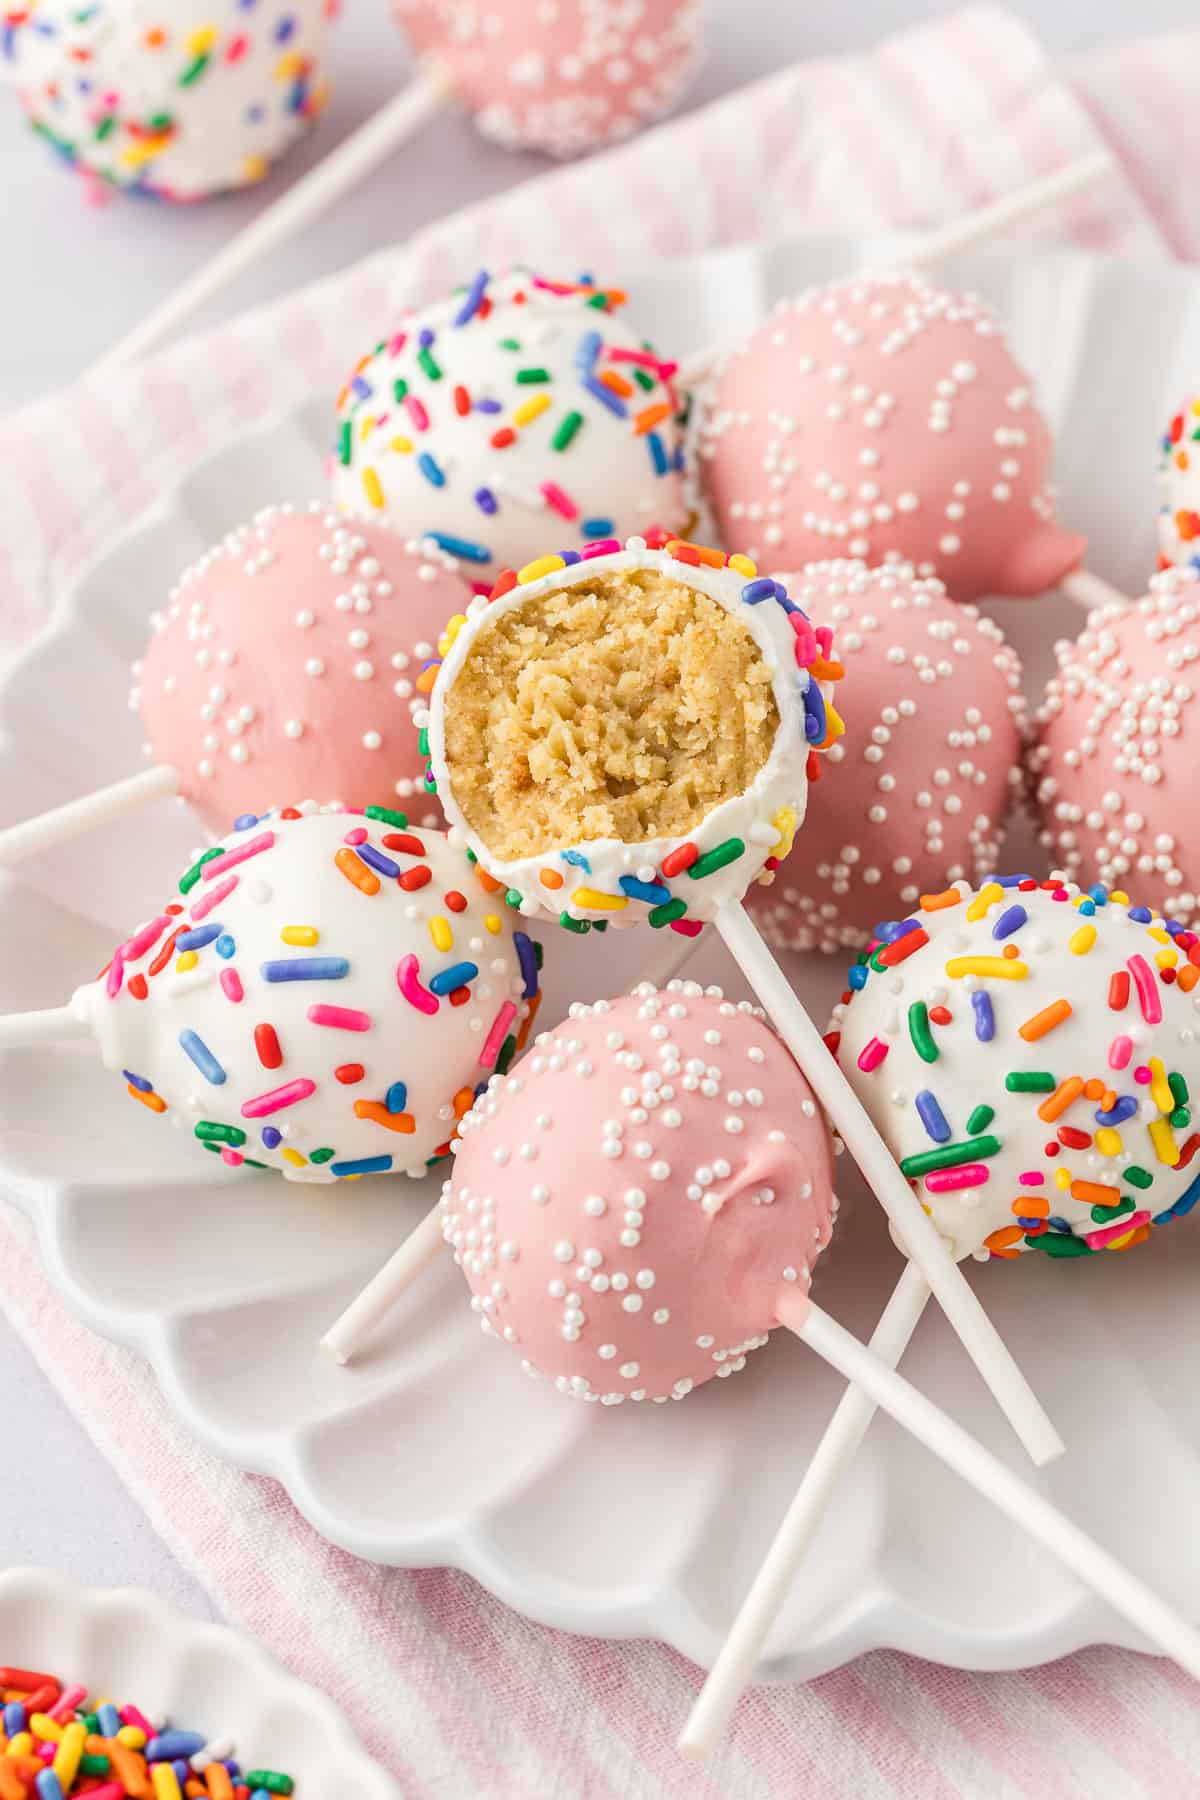 a white plate with a pile of cake pops, some light pink with white sprinkles and some white with rainbow sprinkles, with the cake pop on top missing one bite out of it